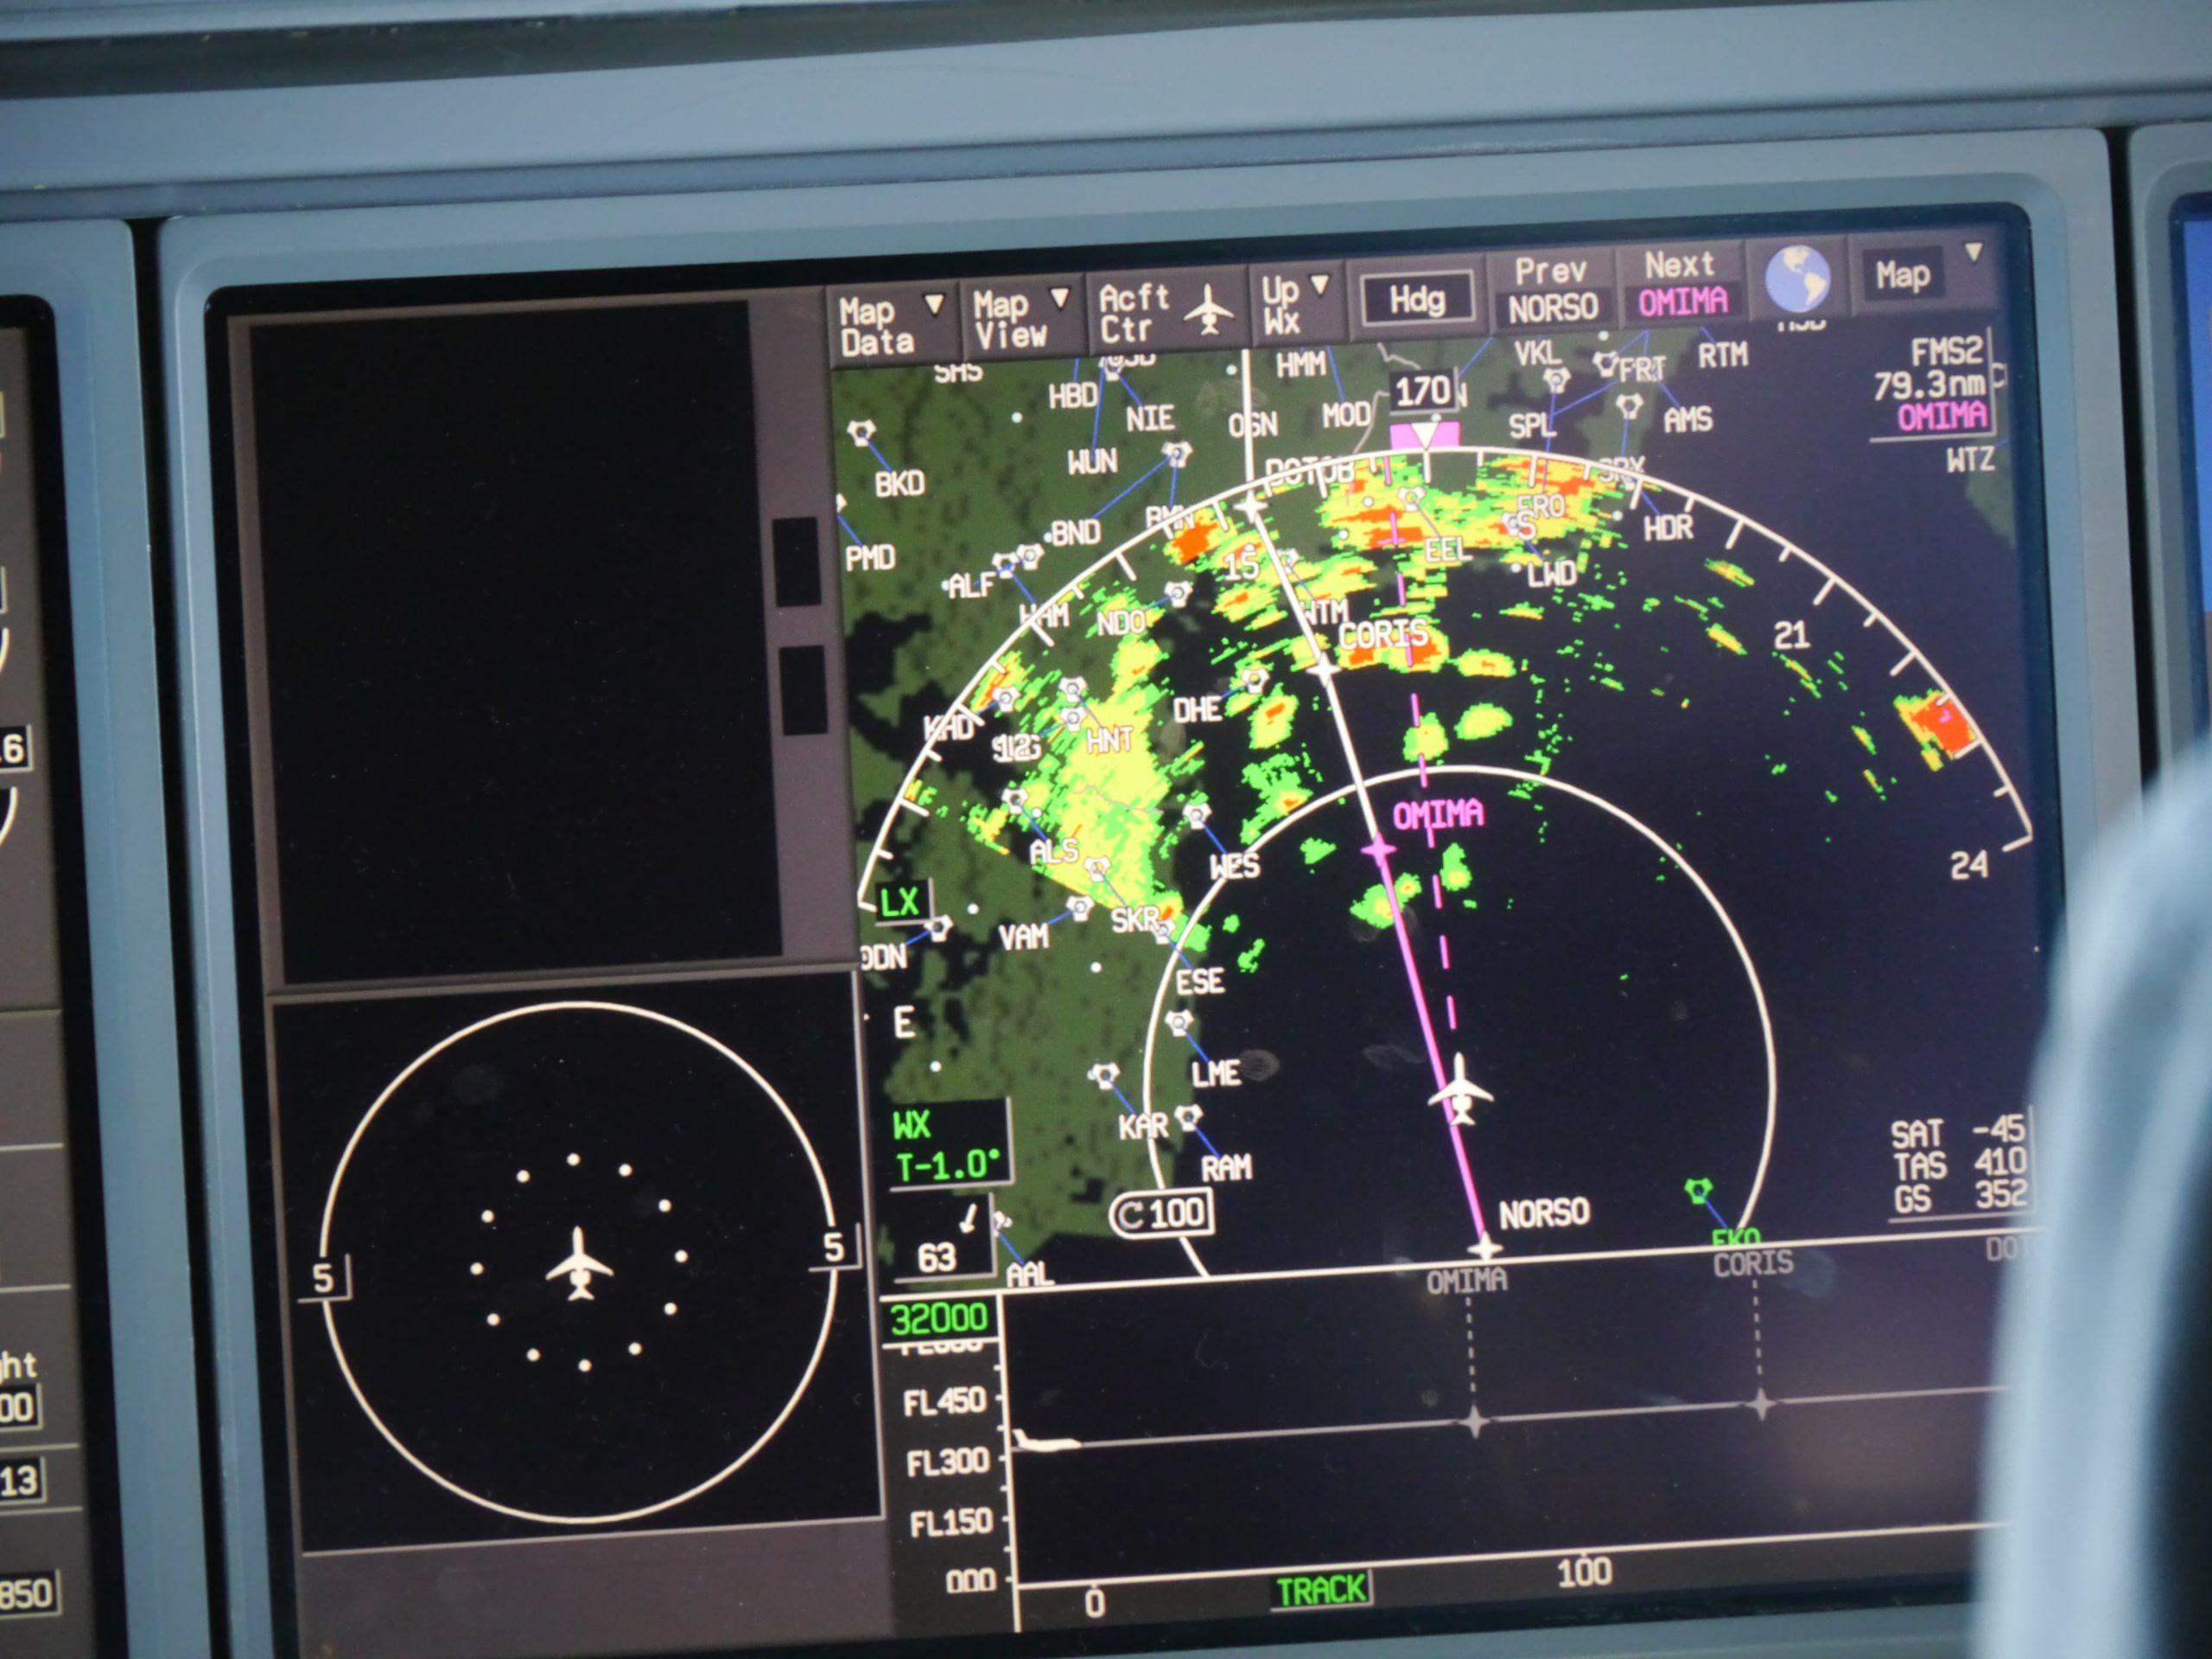 Convective cells seen from the onboard weather radar